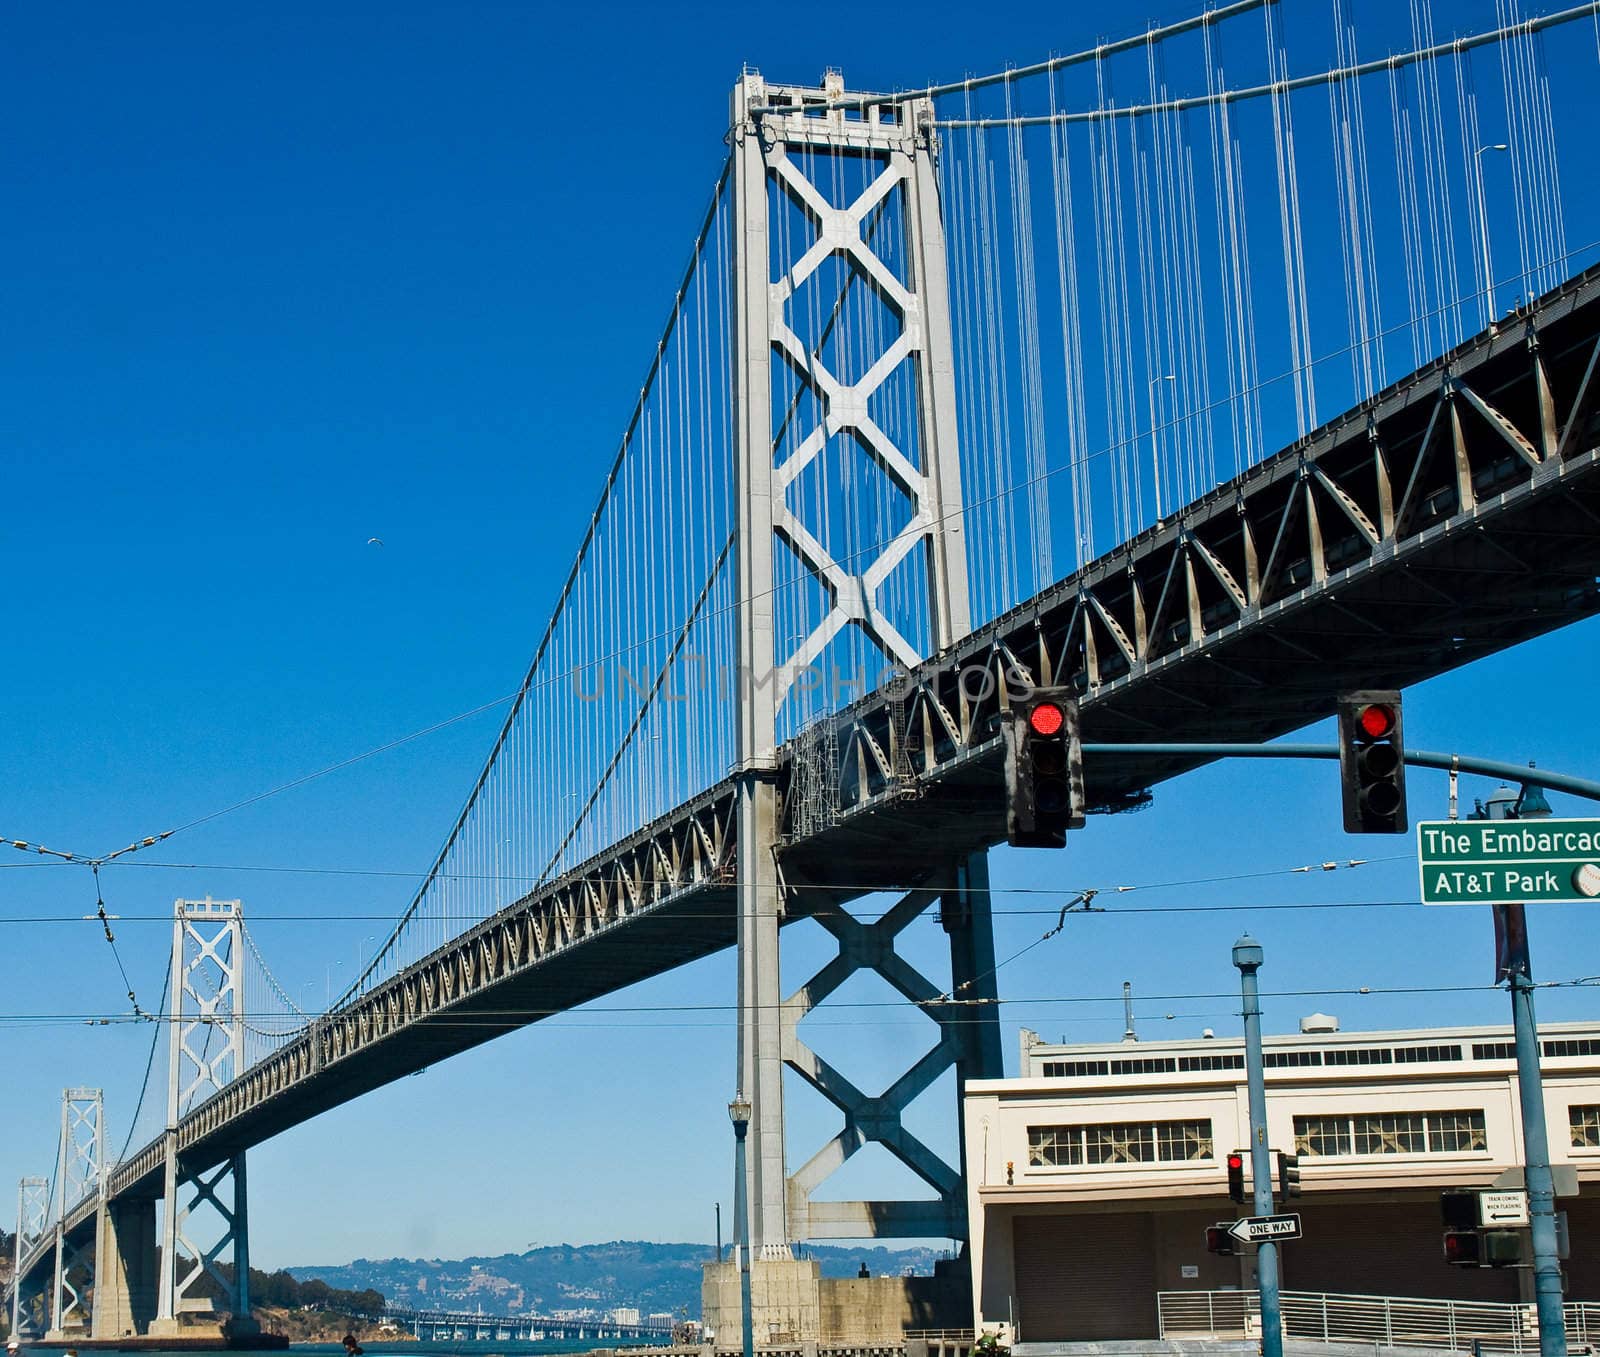 San Francisco Bay Bridge on a Clear Day with a Bright Blue Sky